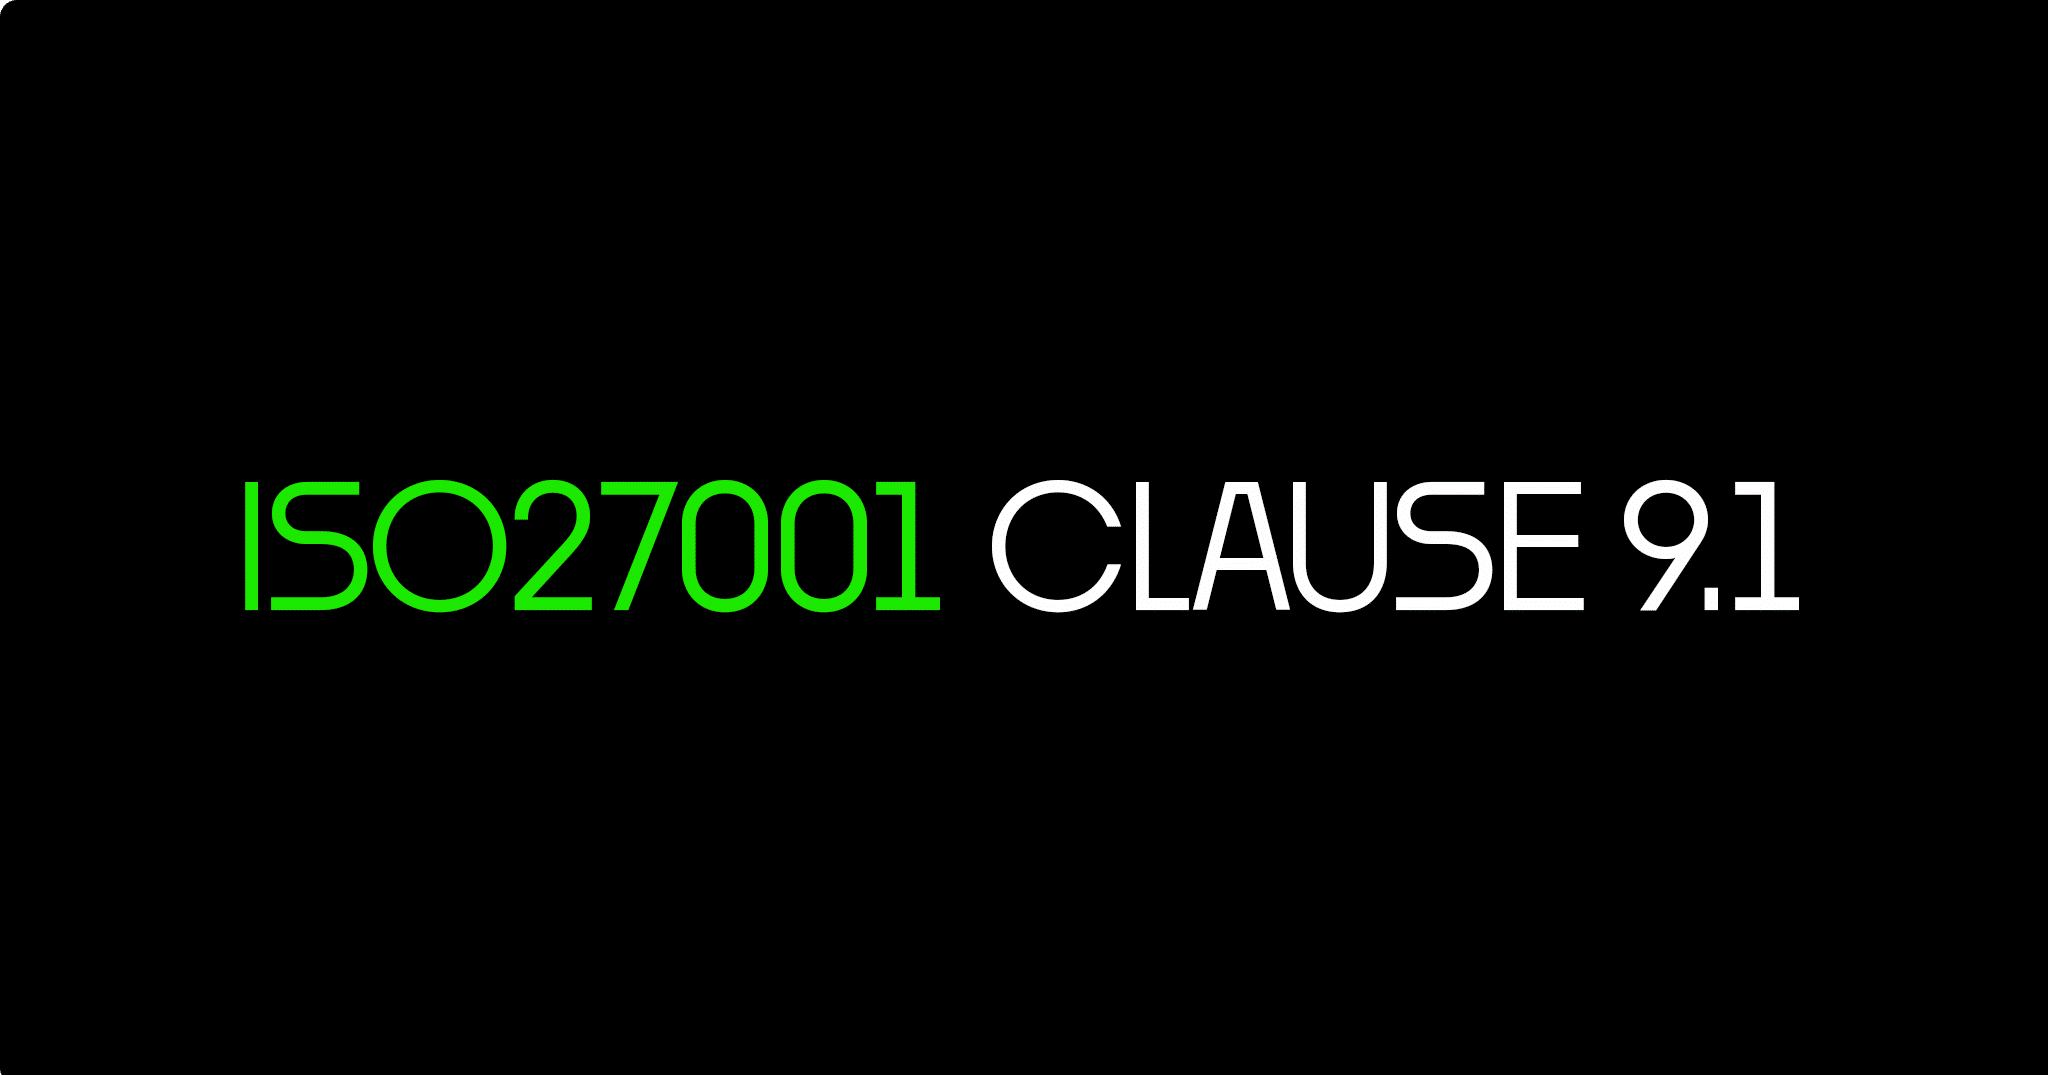 ISO 27001 Clause 9.1 Monitoring, Measurement, Analysis, Evaluation – Ultimate Certification Guide